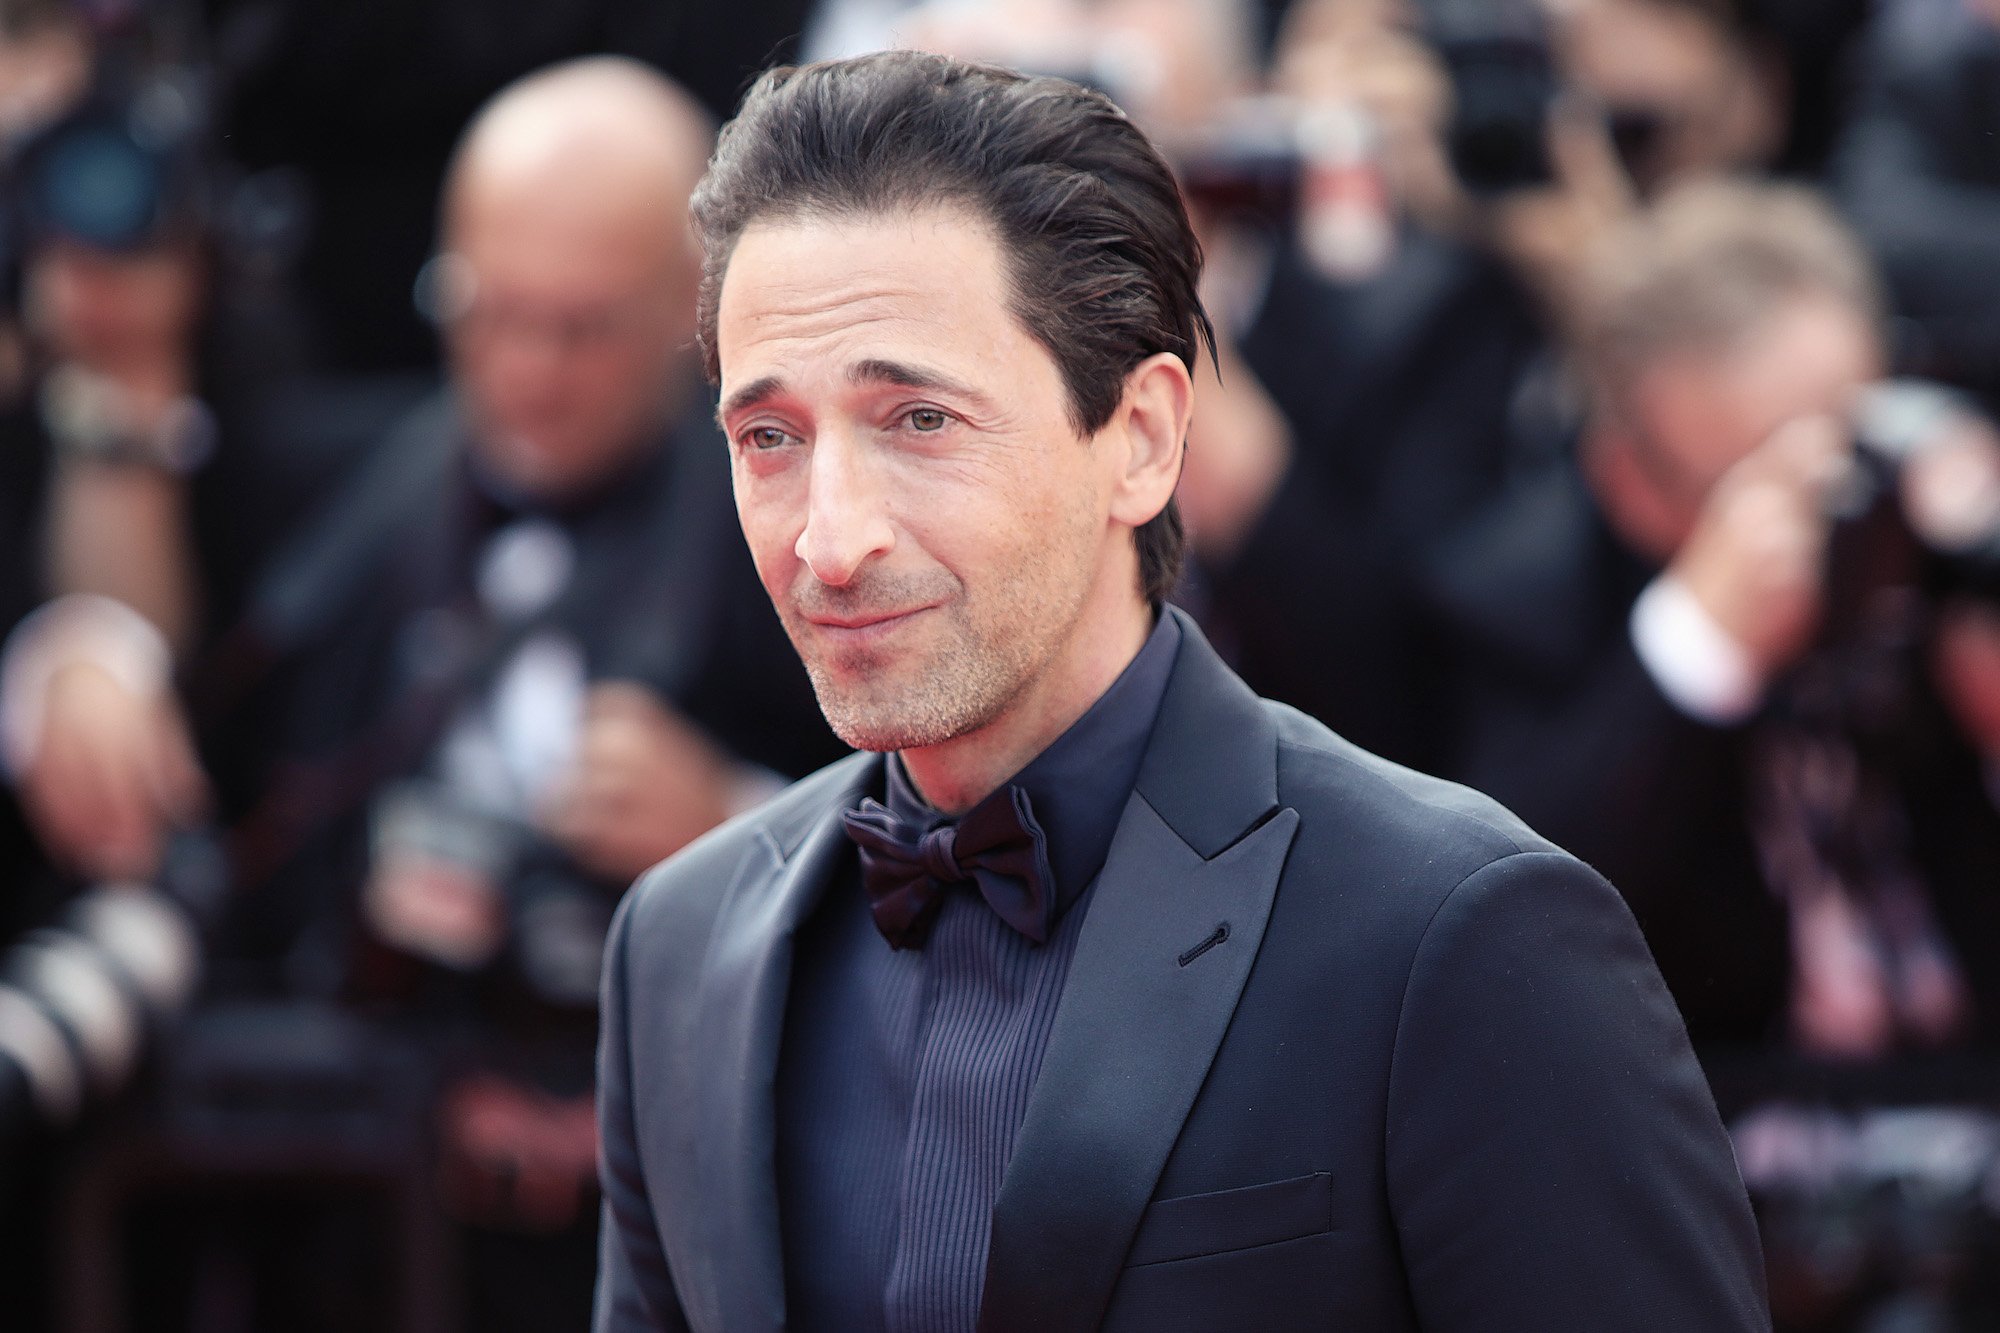 Adrien Brody Was Shocked By His Abrupt Demotion in 'The Thin Red Line ...